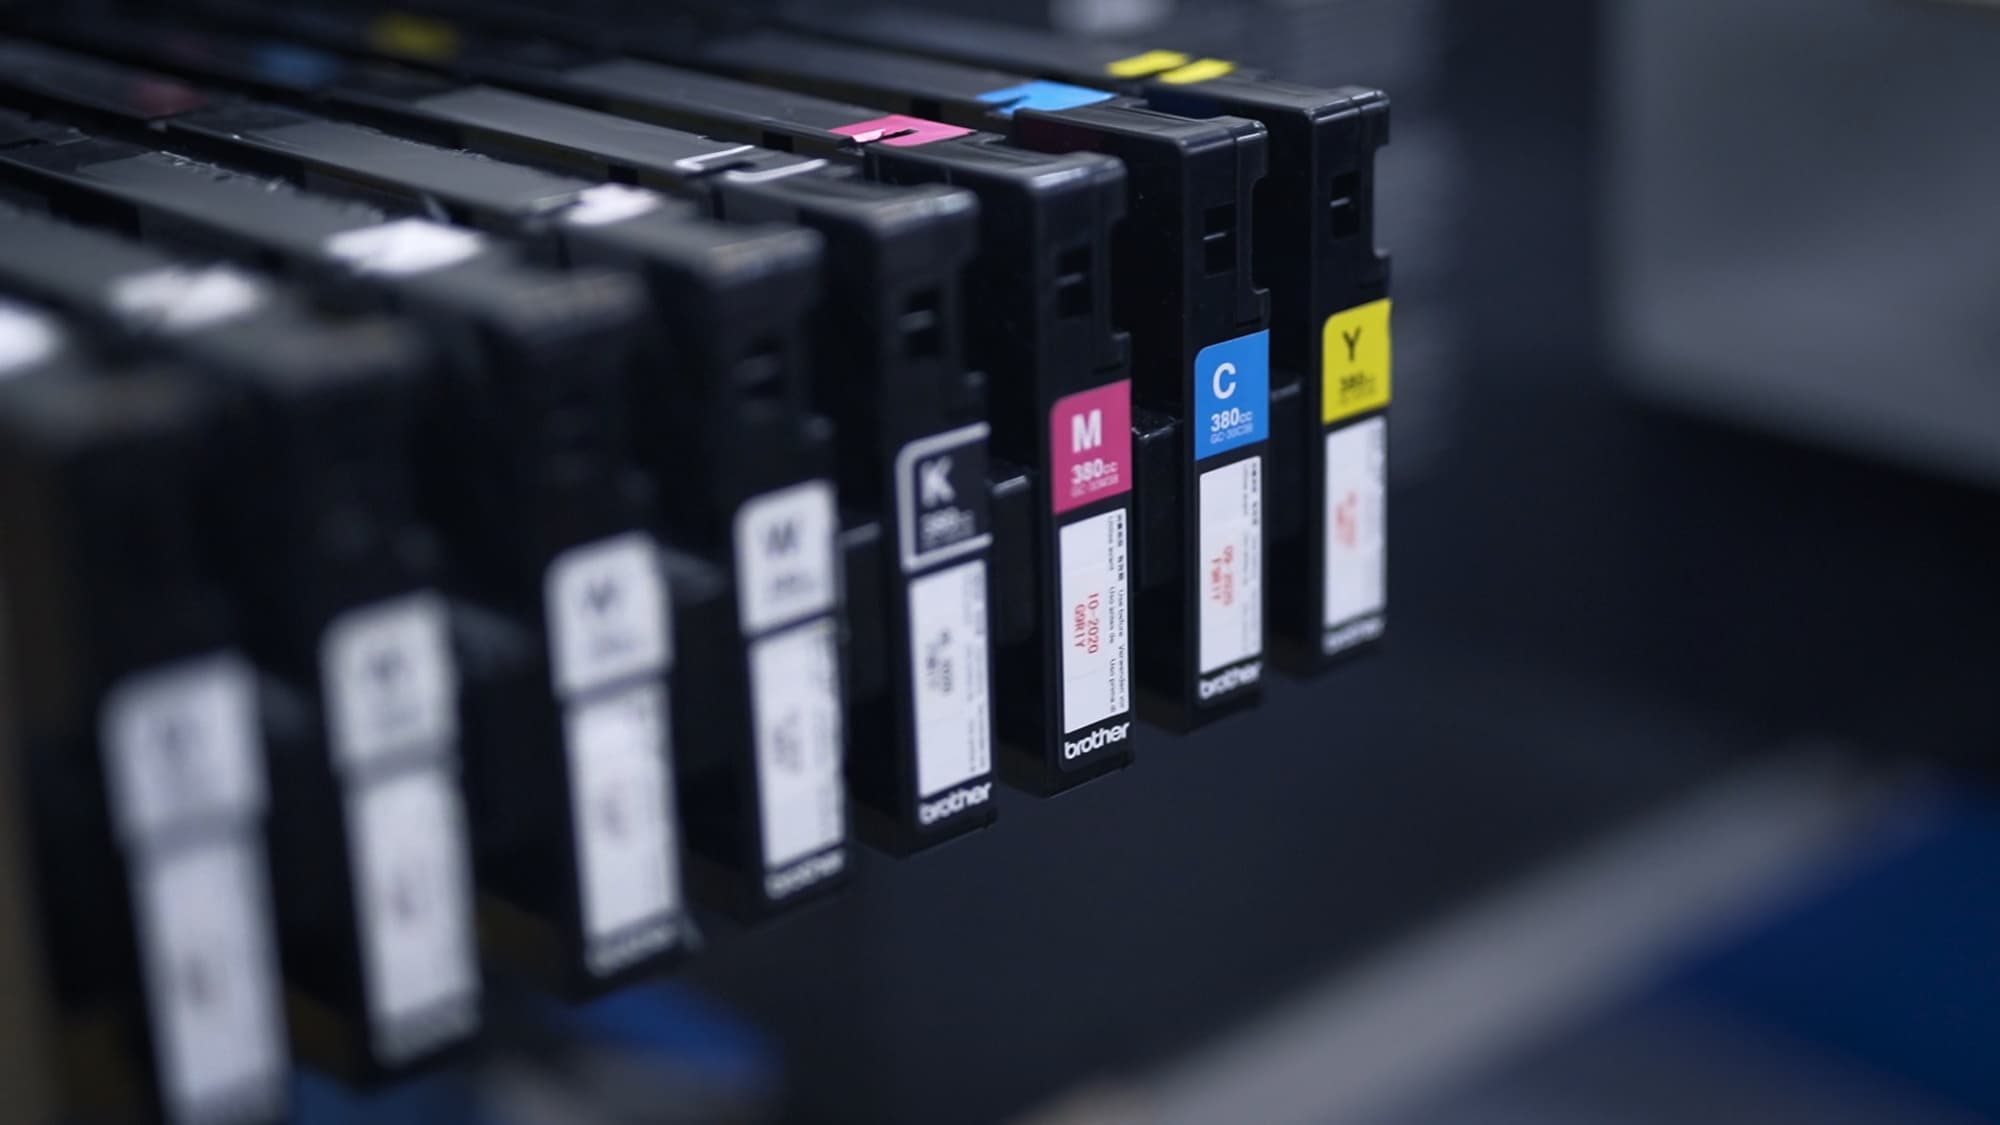 Showcasing the CMYK ink cartridges of a direct-to-garment printer.